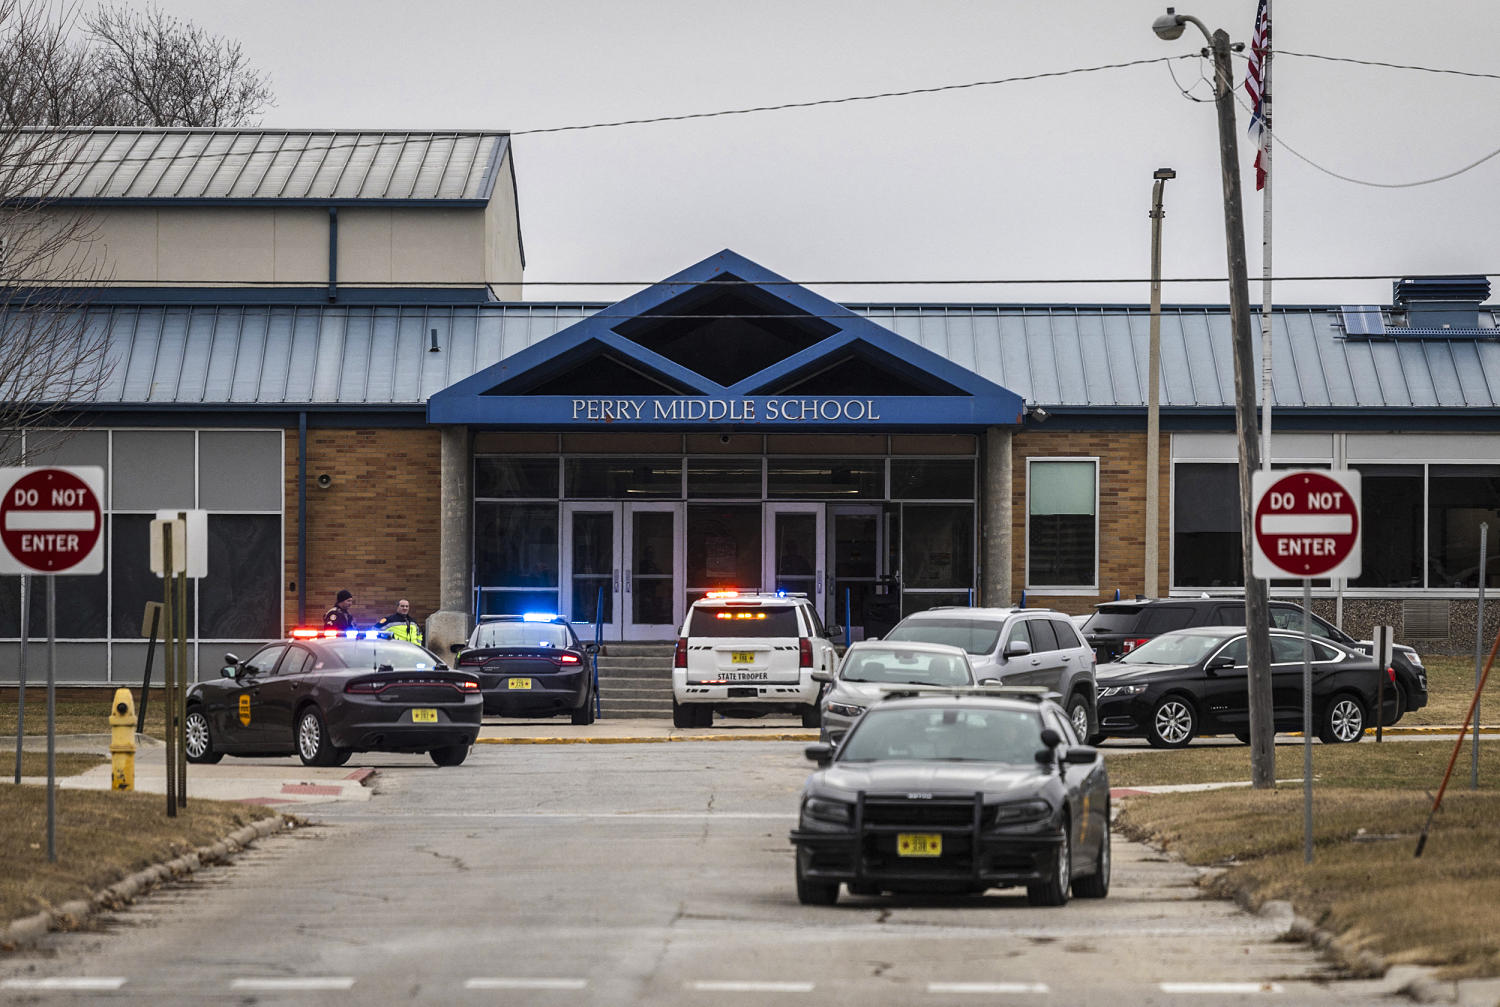 What we know so far about the Iowa school shooting